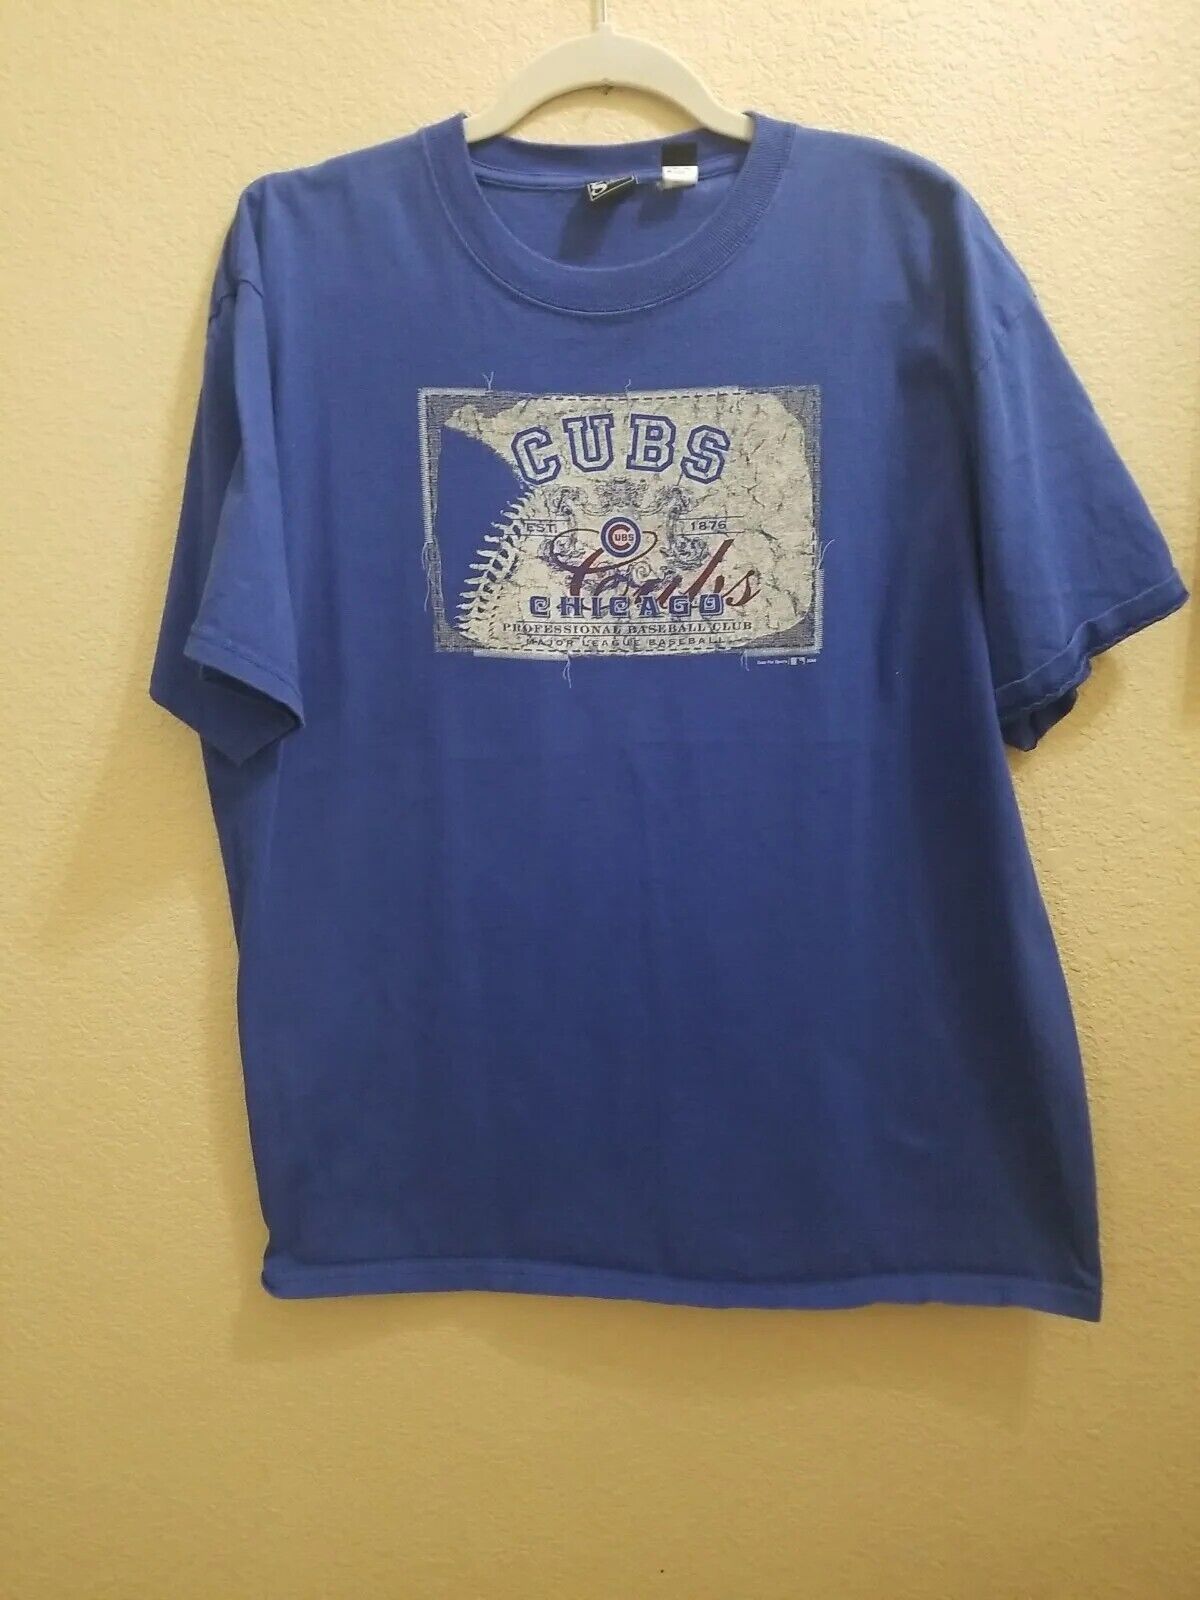 Primary image for MLB Chicago Cubs T shirt Size XL BY Gear For Sports 2008